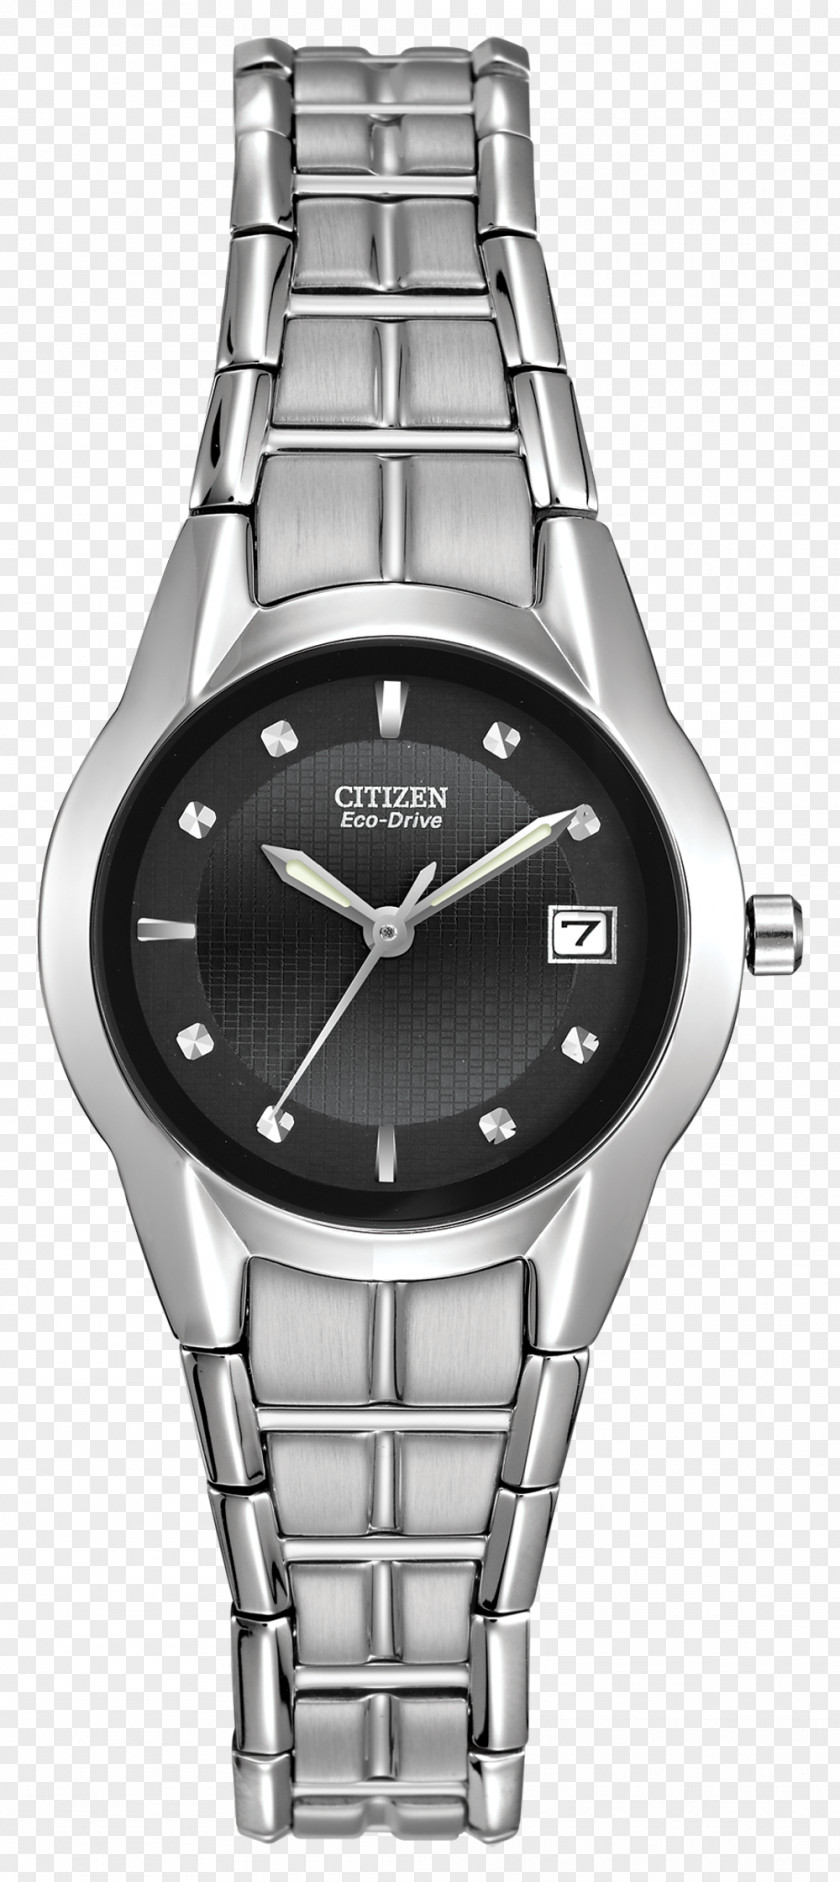 Watch Eco-Drive Citizen Holdings Chronograph Jewellery PNG